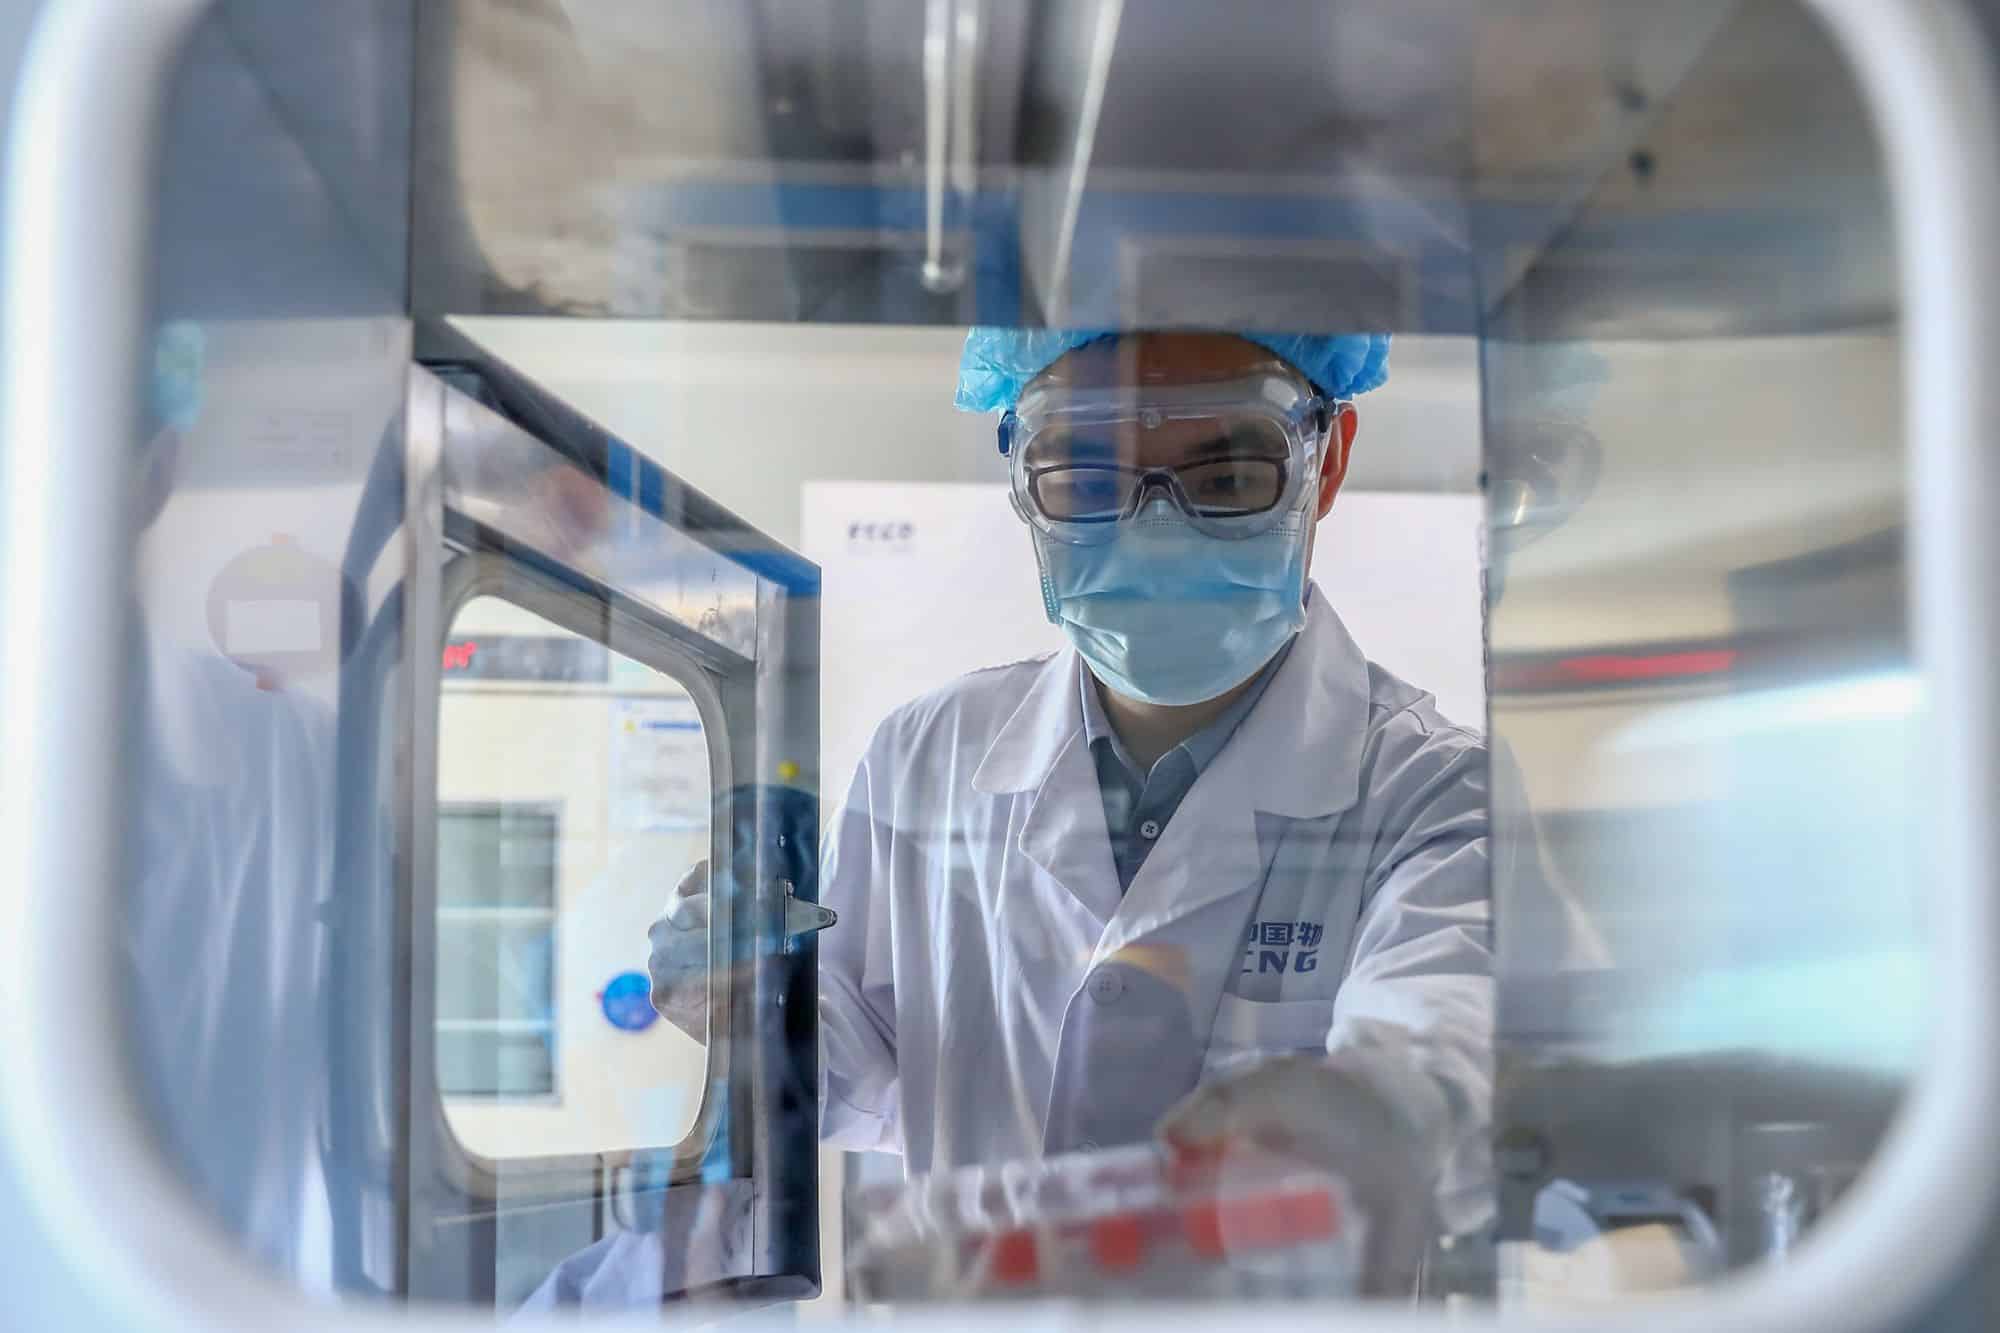 A staff member takes out samples of the COVID-19 inactivated vaccine at a vaccine production plant in Beijing, in April 2020.